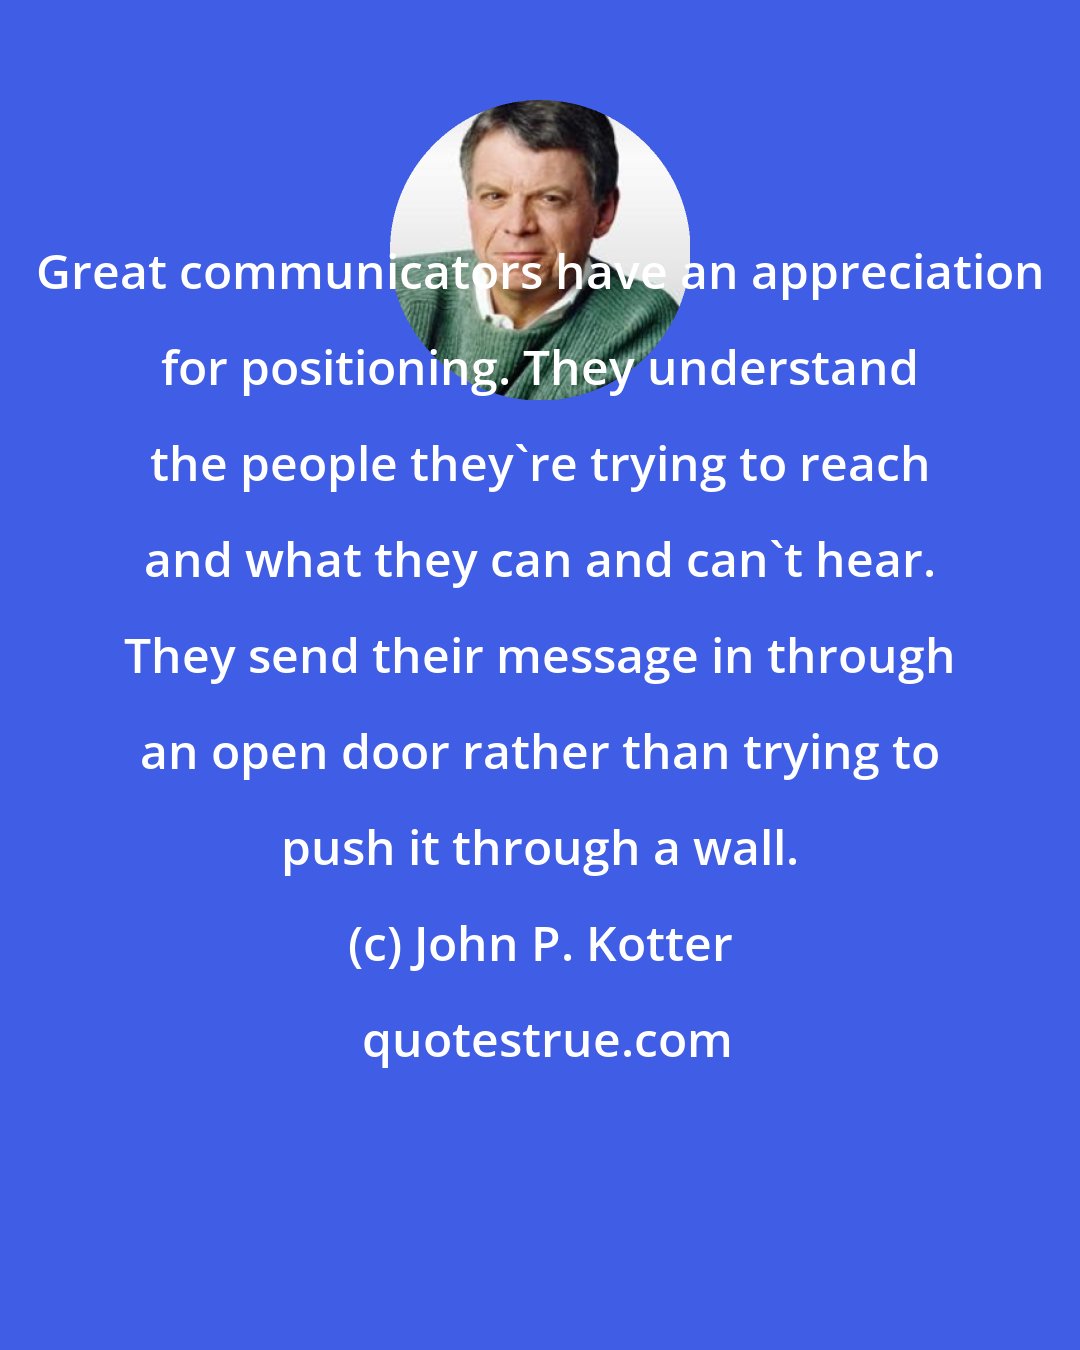 John P. Kotter: Great communicators have an appreciation for positioning. They understand the people they're trying to reach and what they can and can't hear. They send their message in through an open door rather than trying to push it through a wall.